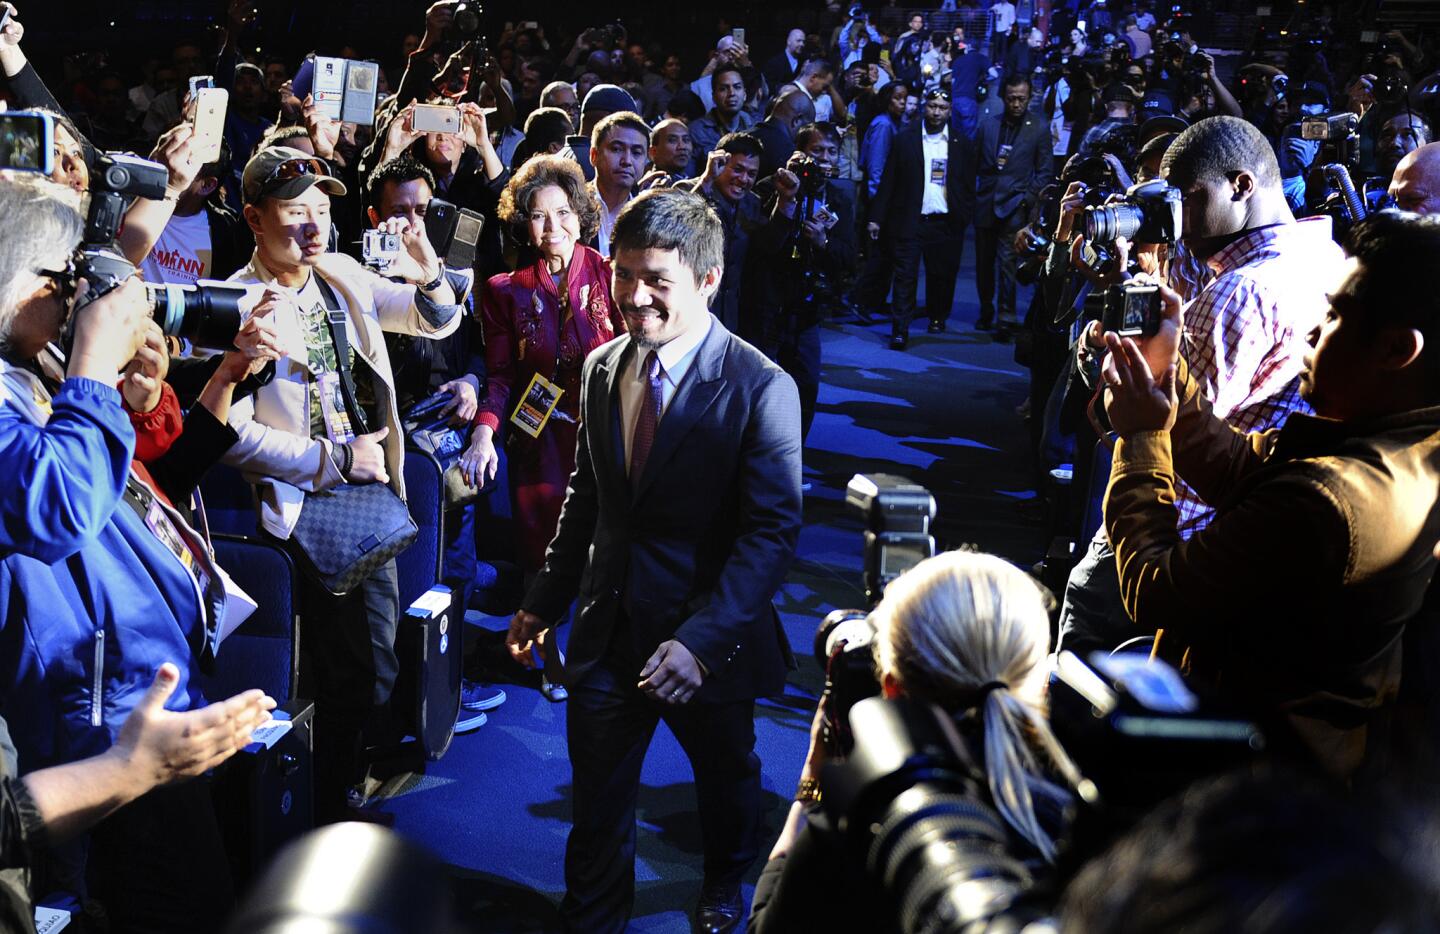 Boxer Manny Pacquiao is introduced as he walks into the Nokia Theatre on Wednesday before a news conference.